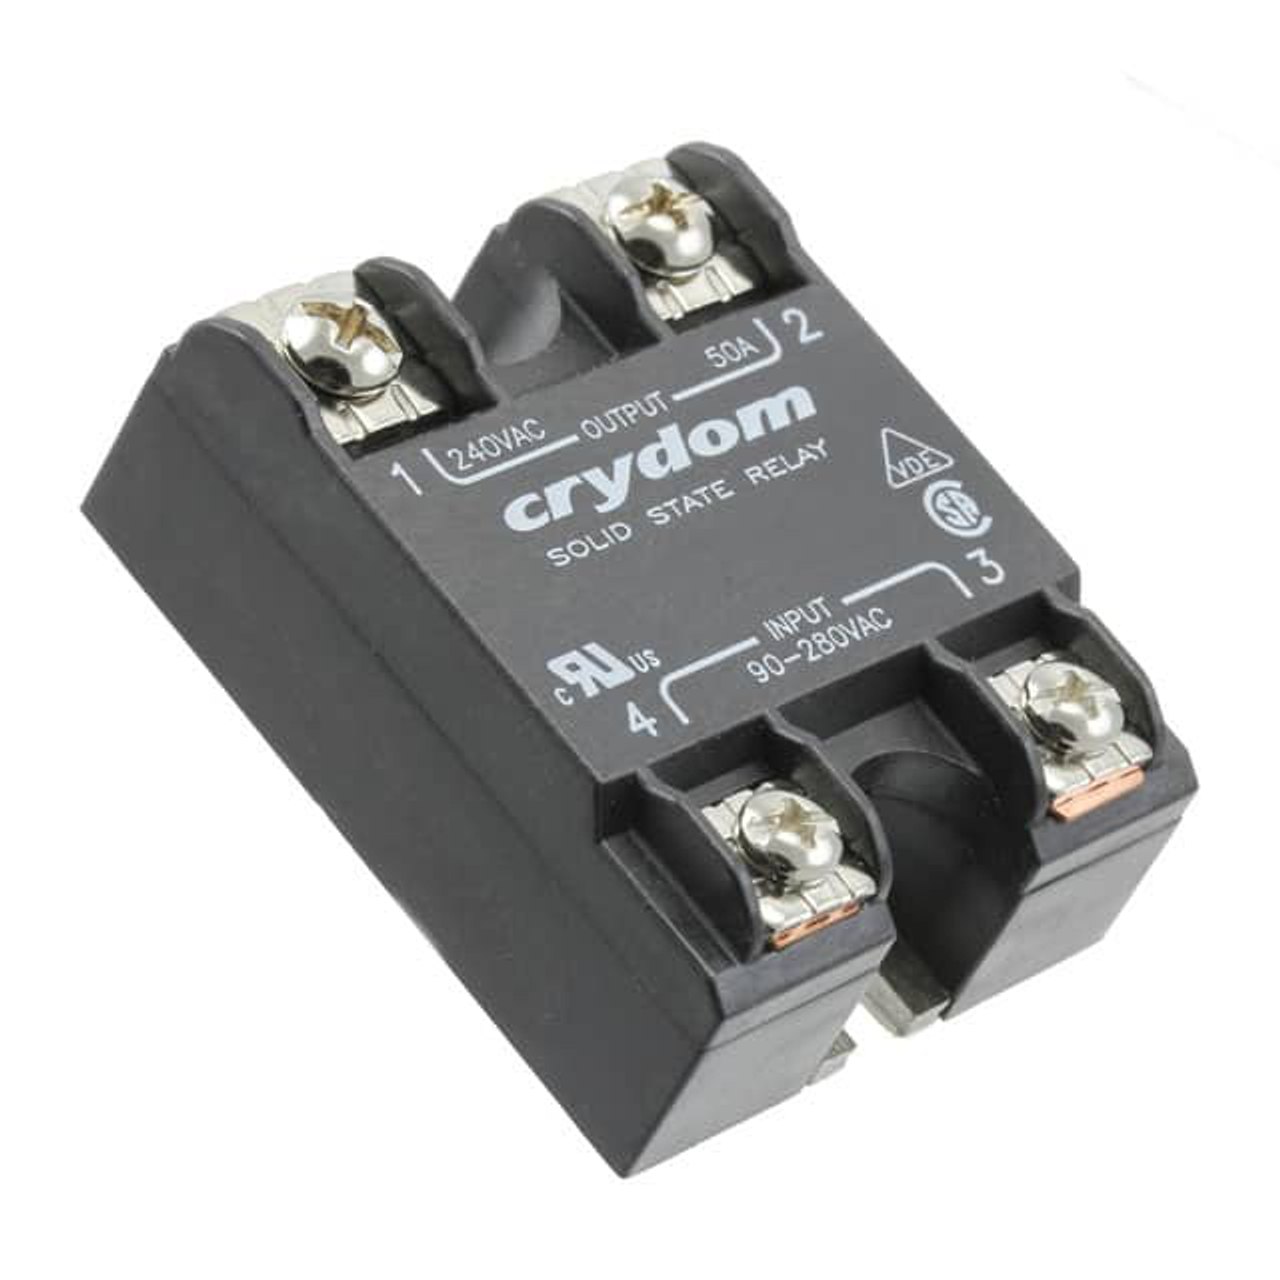 Sensata Technologies/Crydom D2450T Solid State Relays